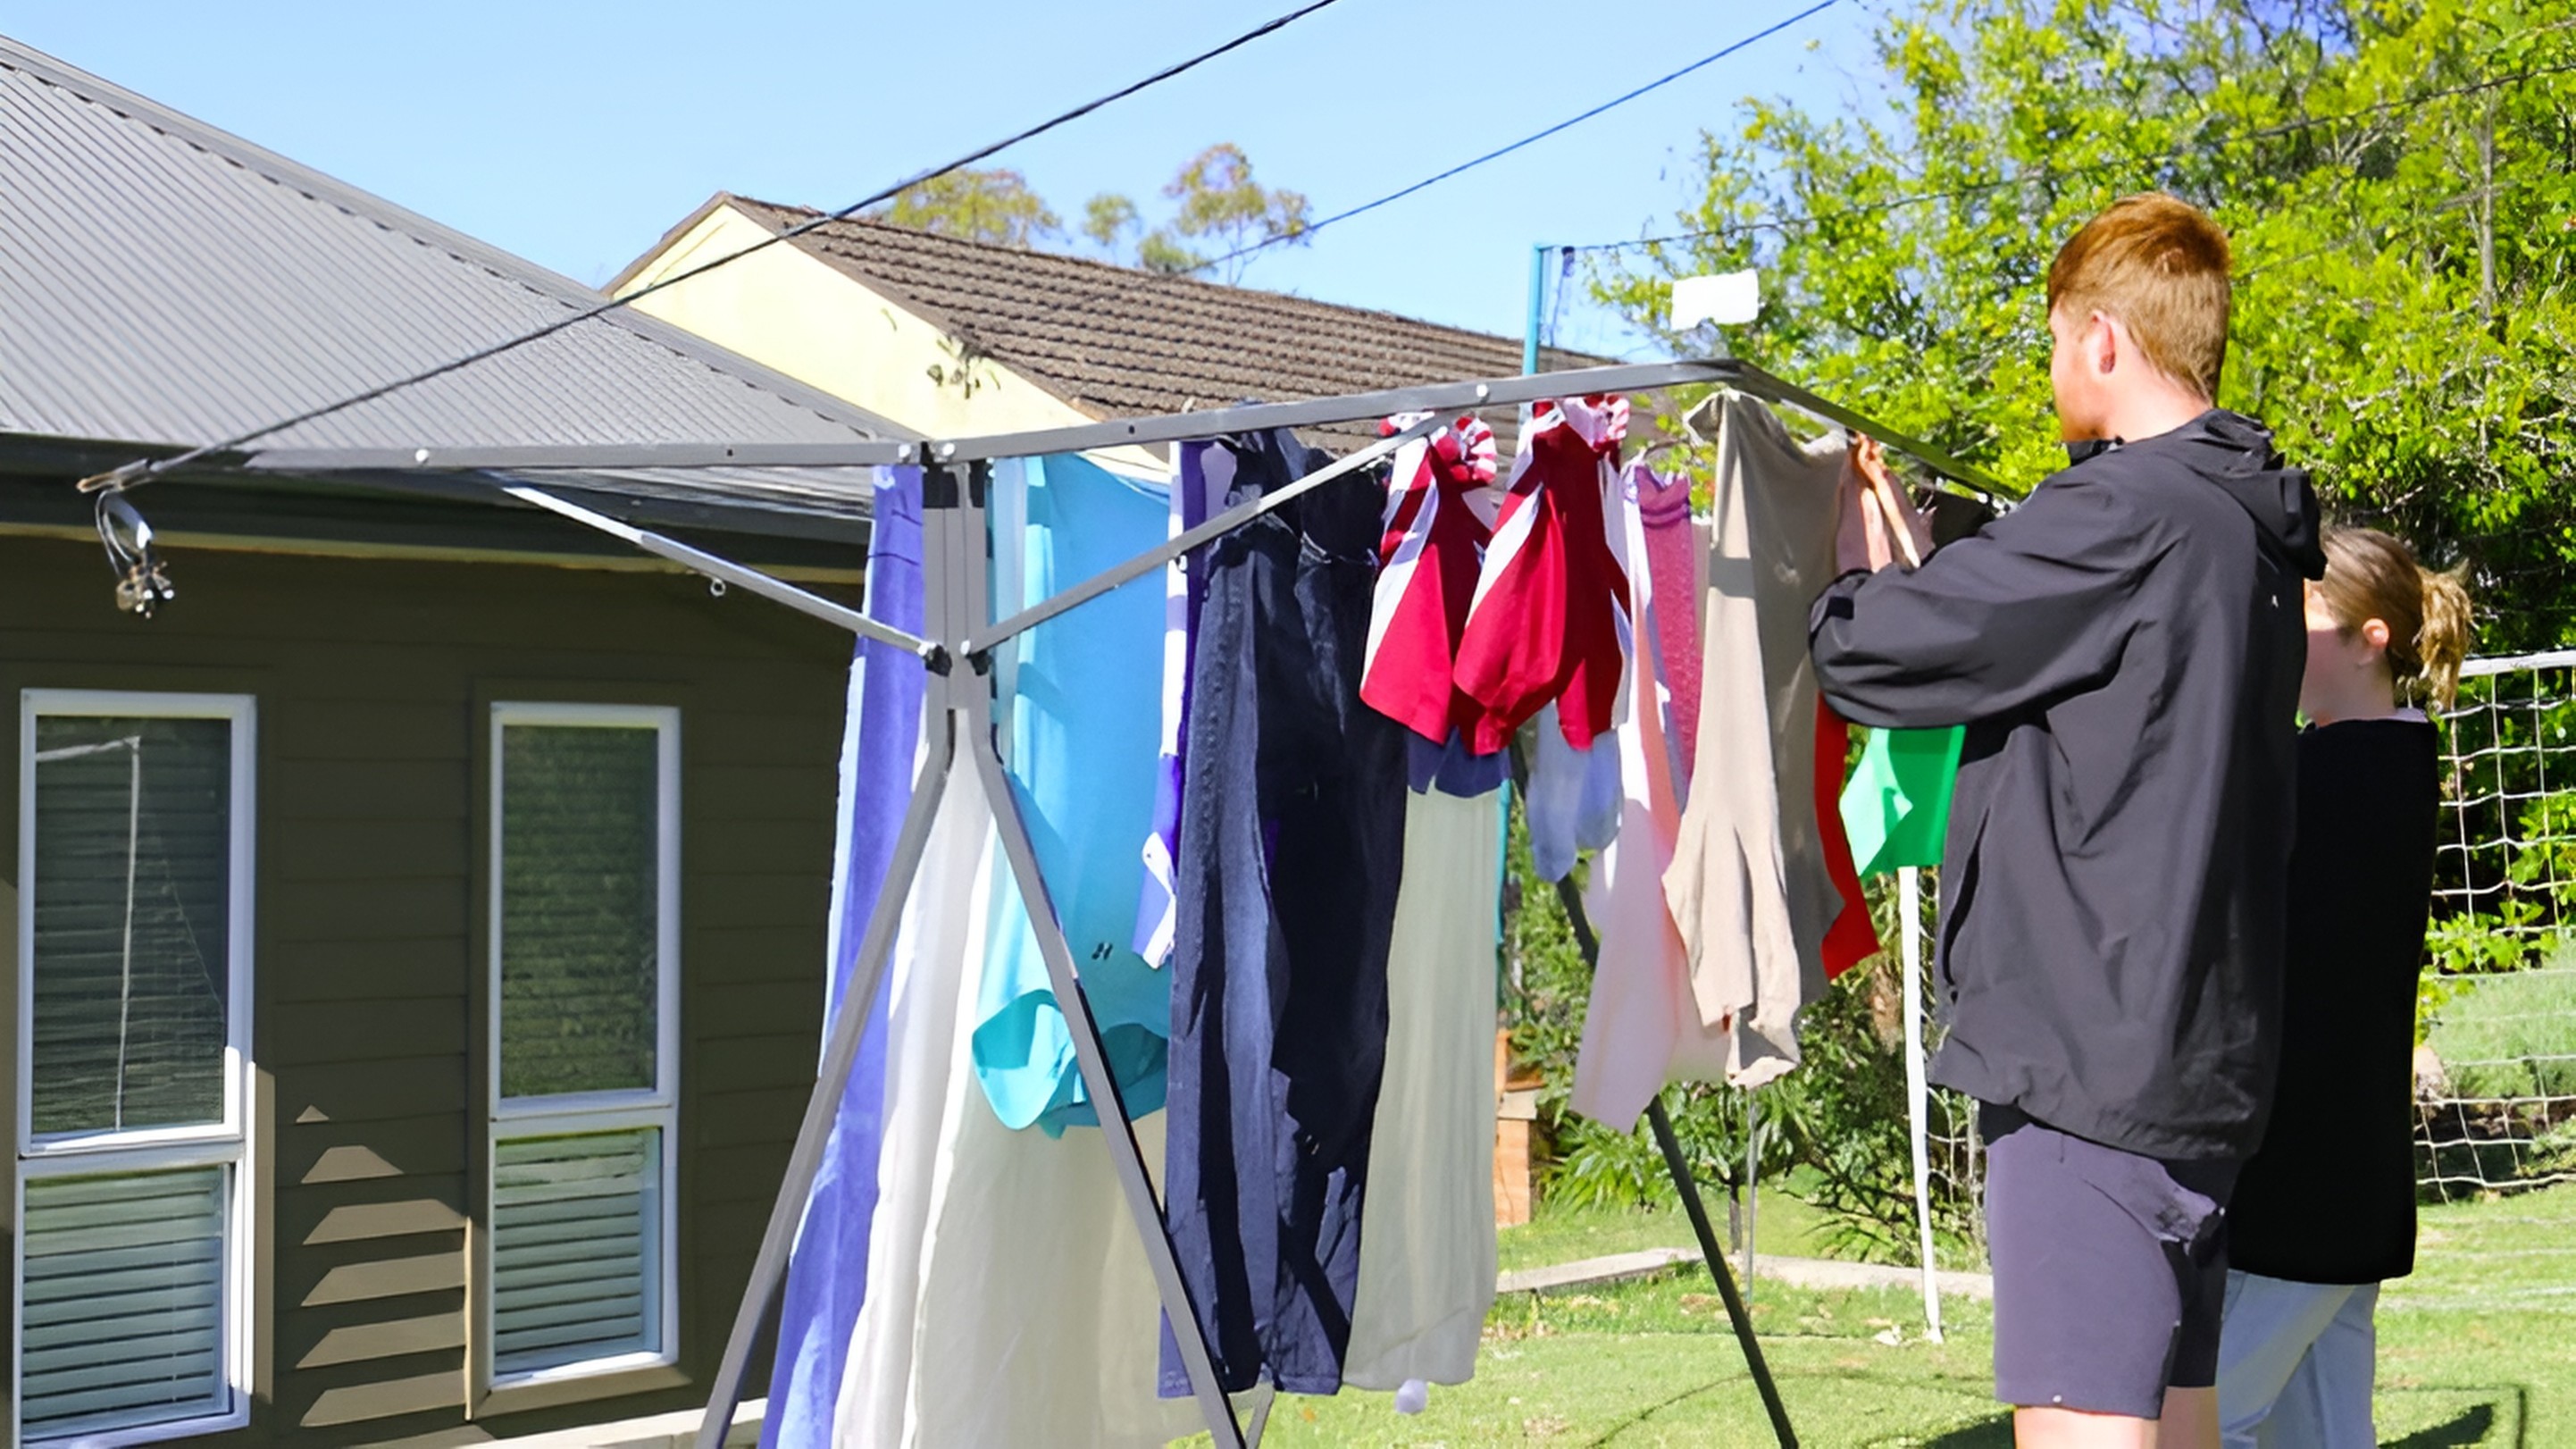 Sunchaser Mobile Clothesline Review: The Ideal Solution for Efficient Outdoor Drying?